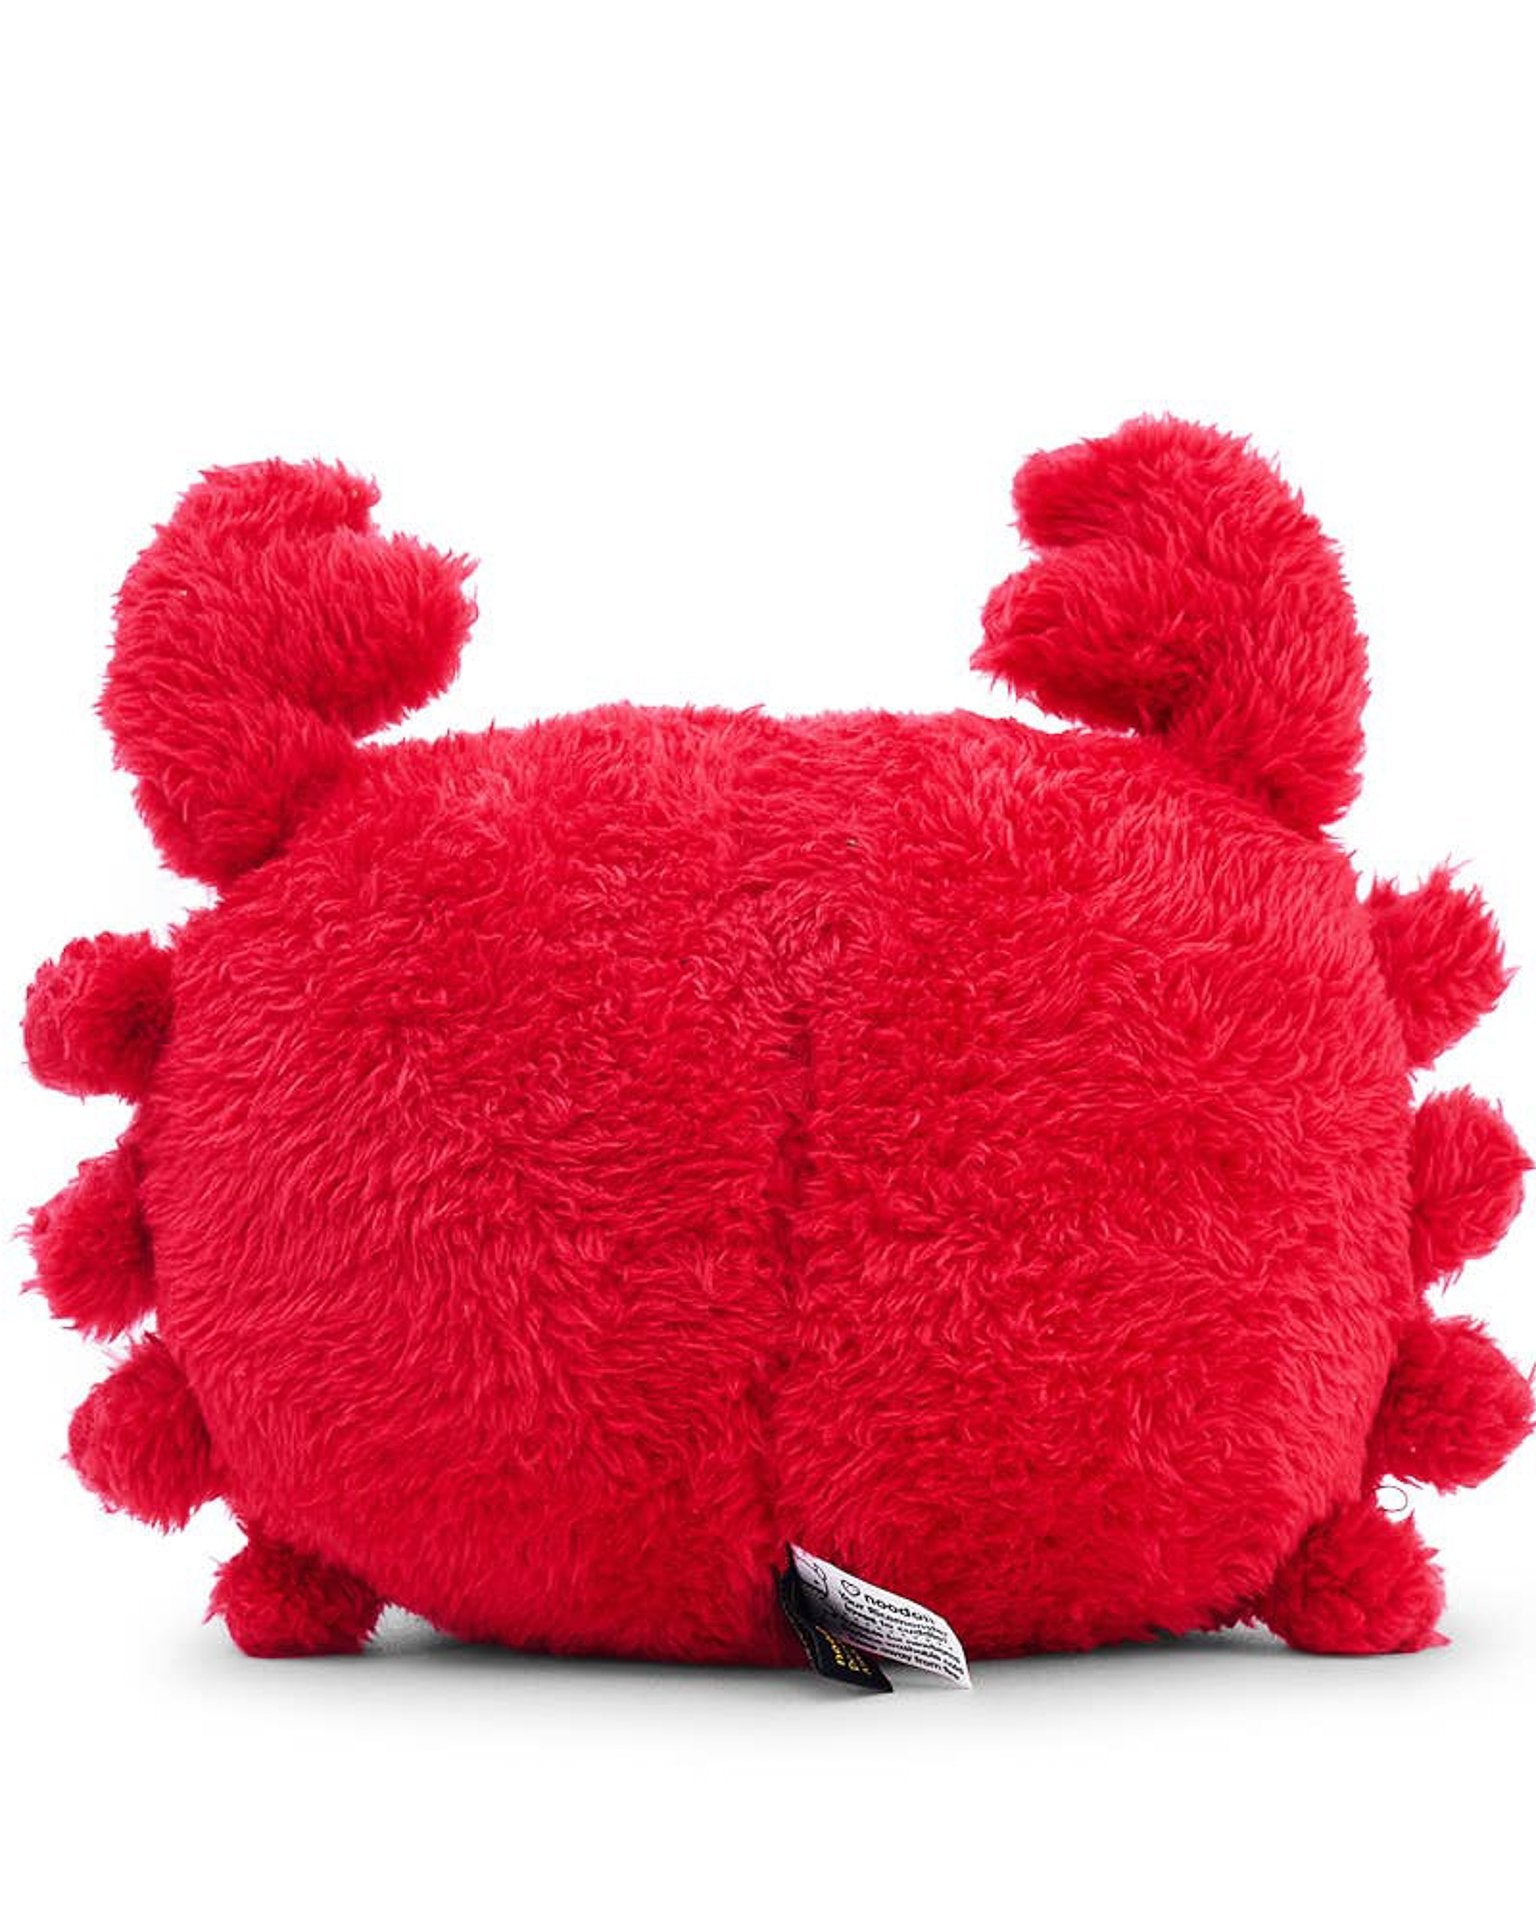 Little noodoll play ricesurimi red crab plush toy